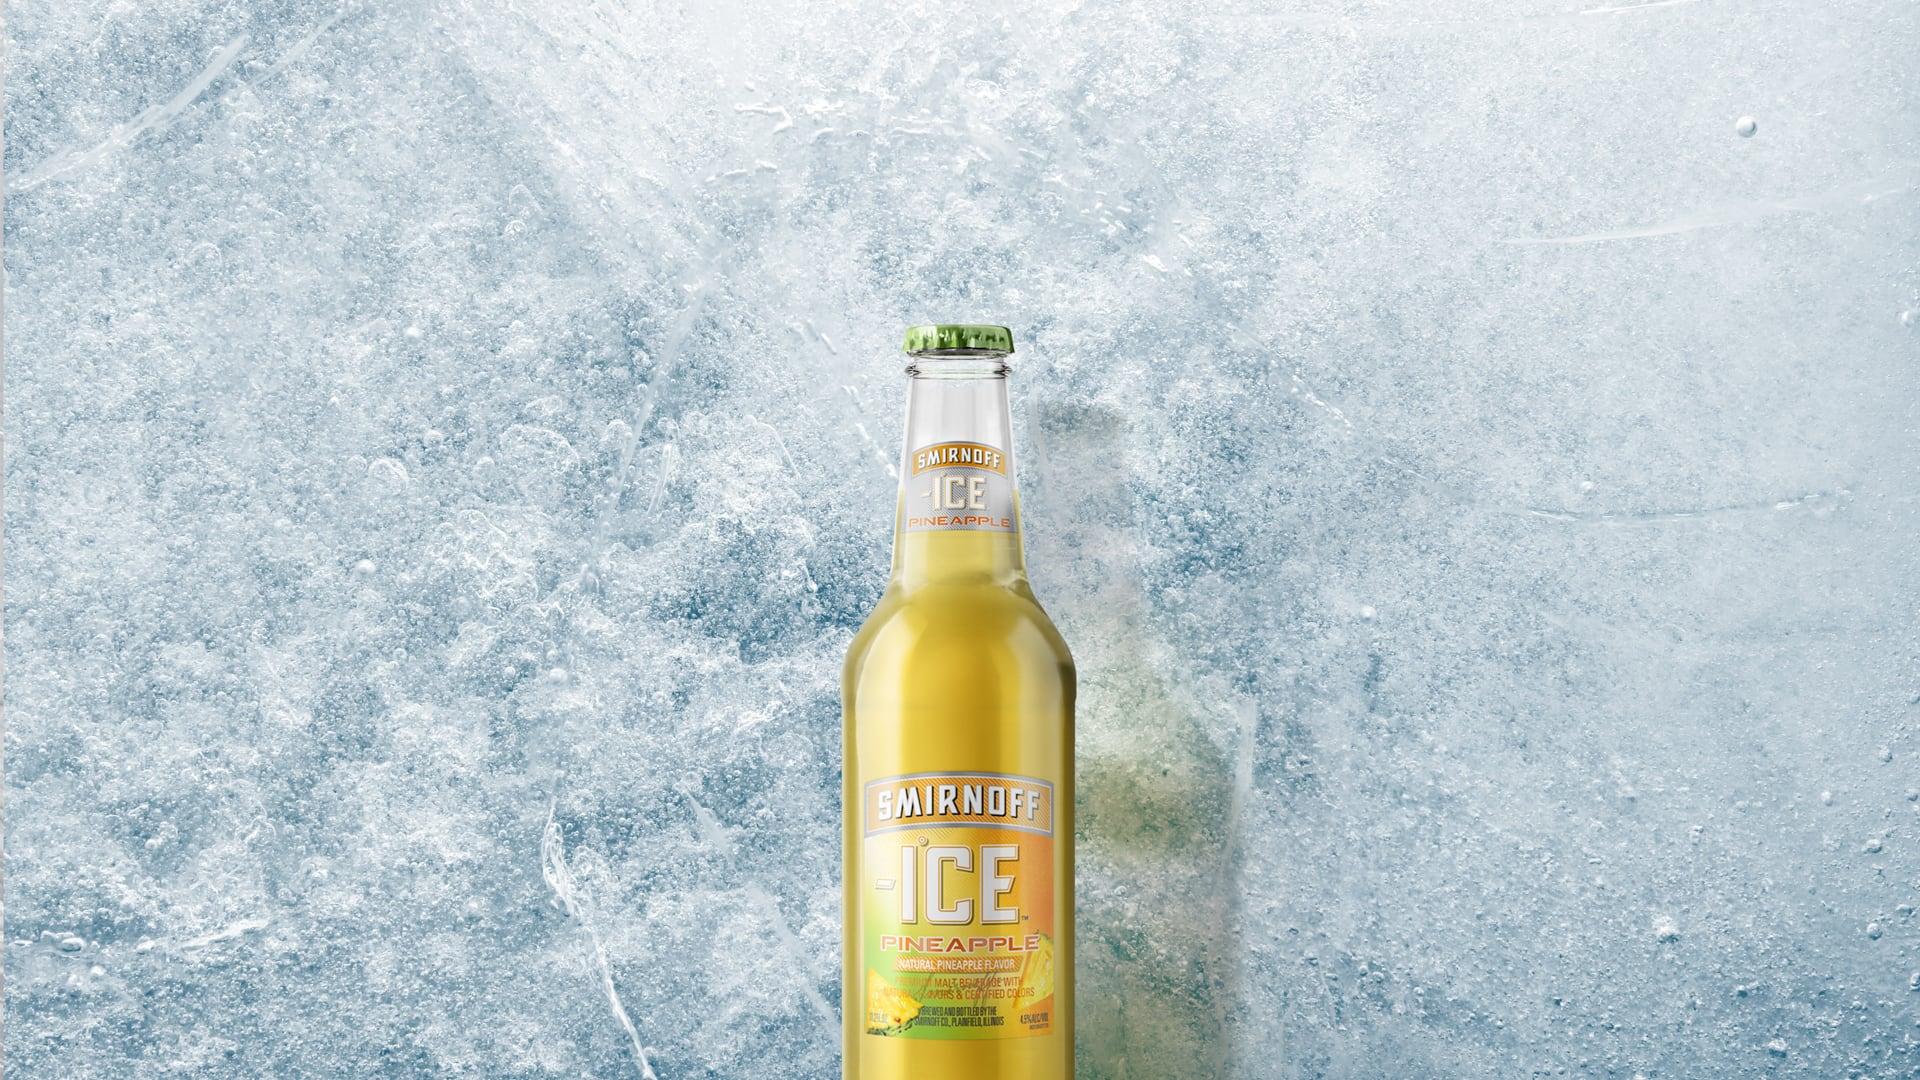 Smirnoff Ice Pineapple on a Icy background